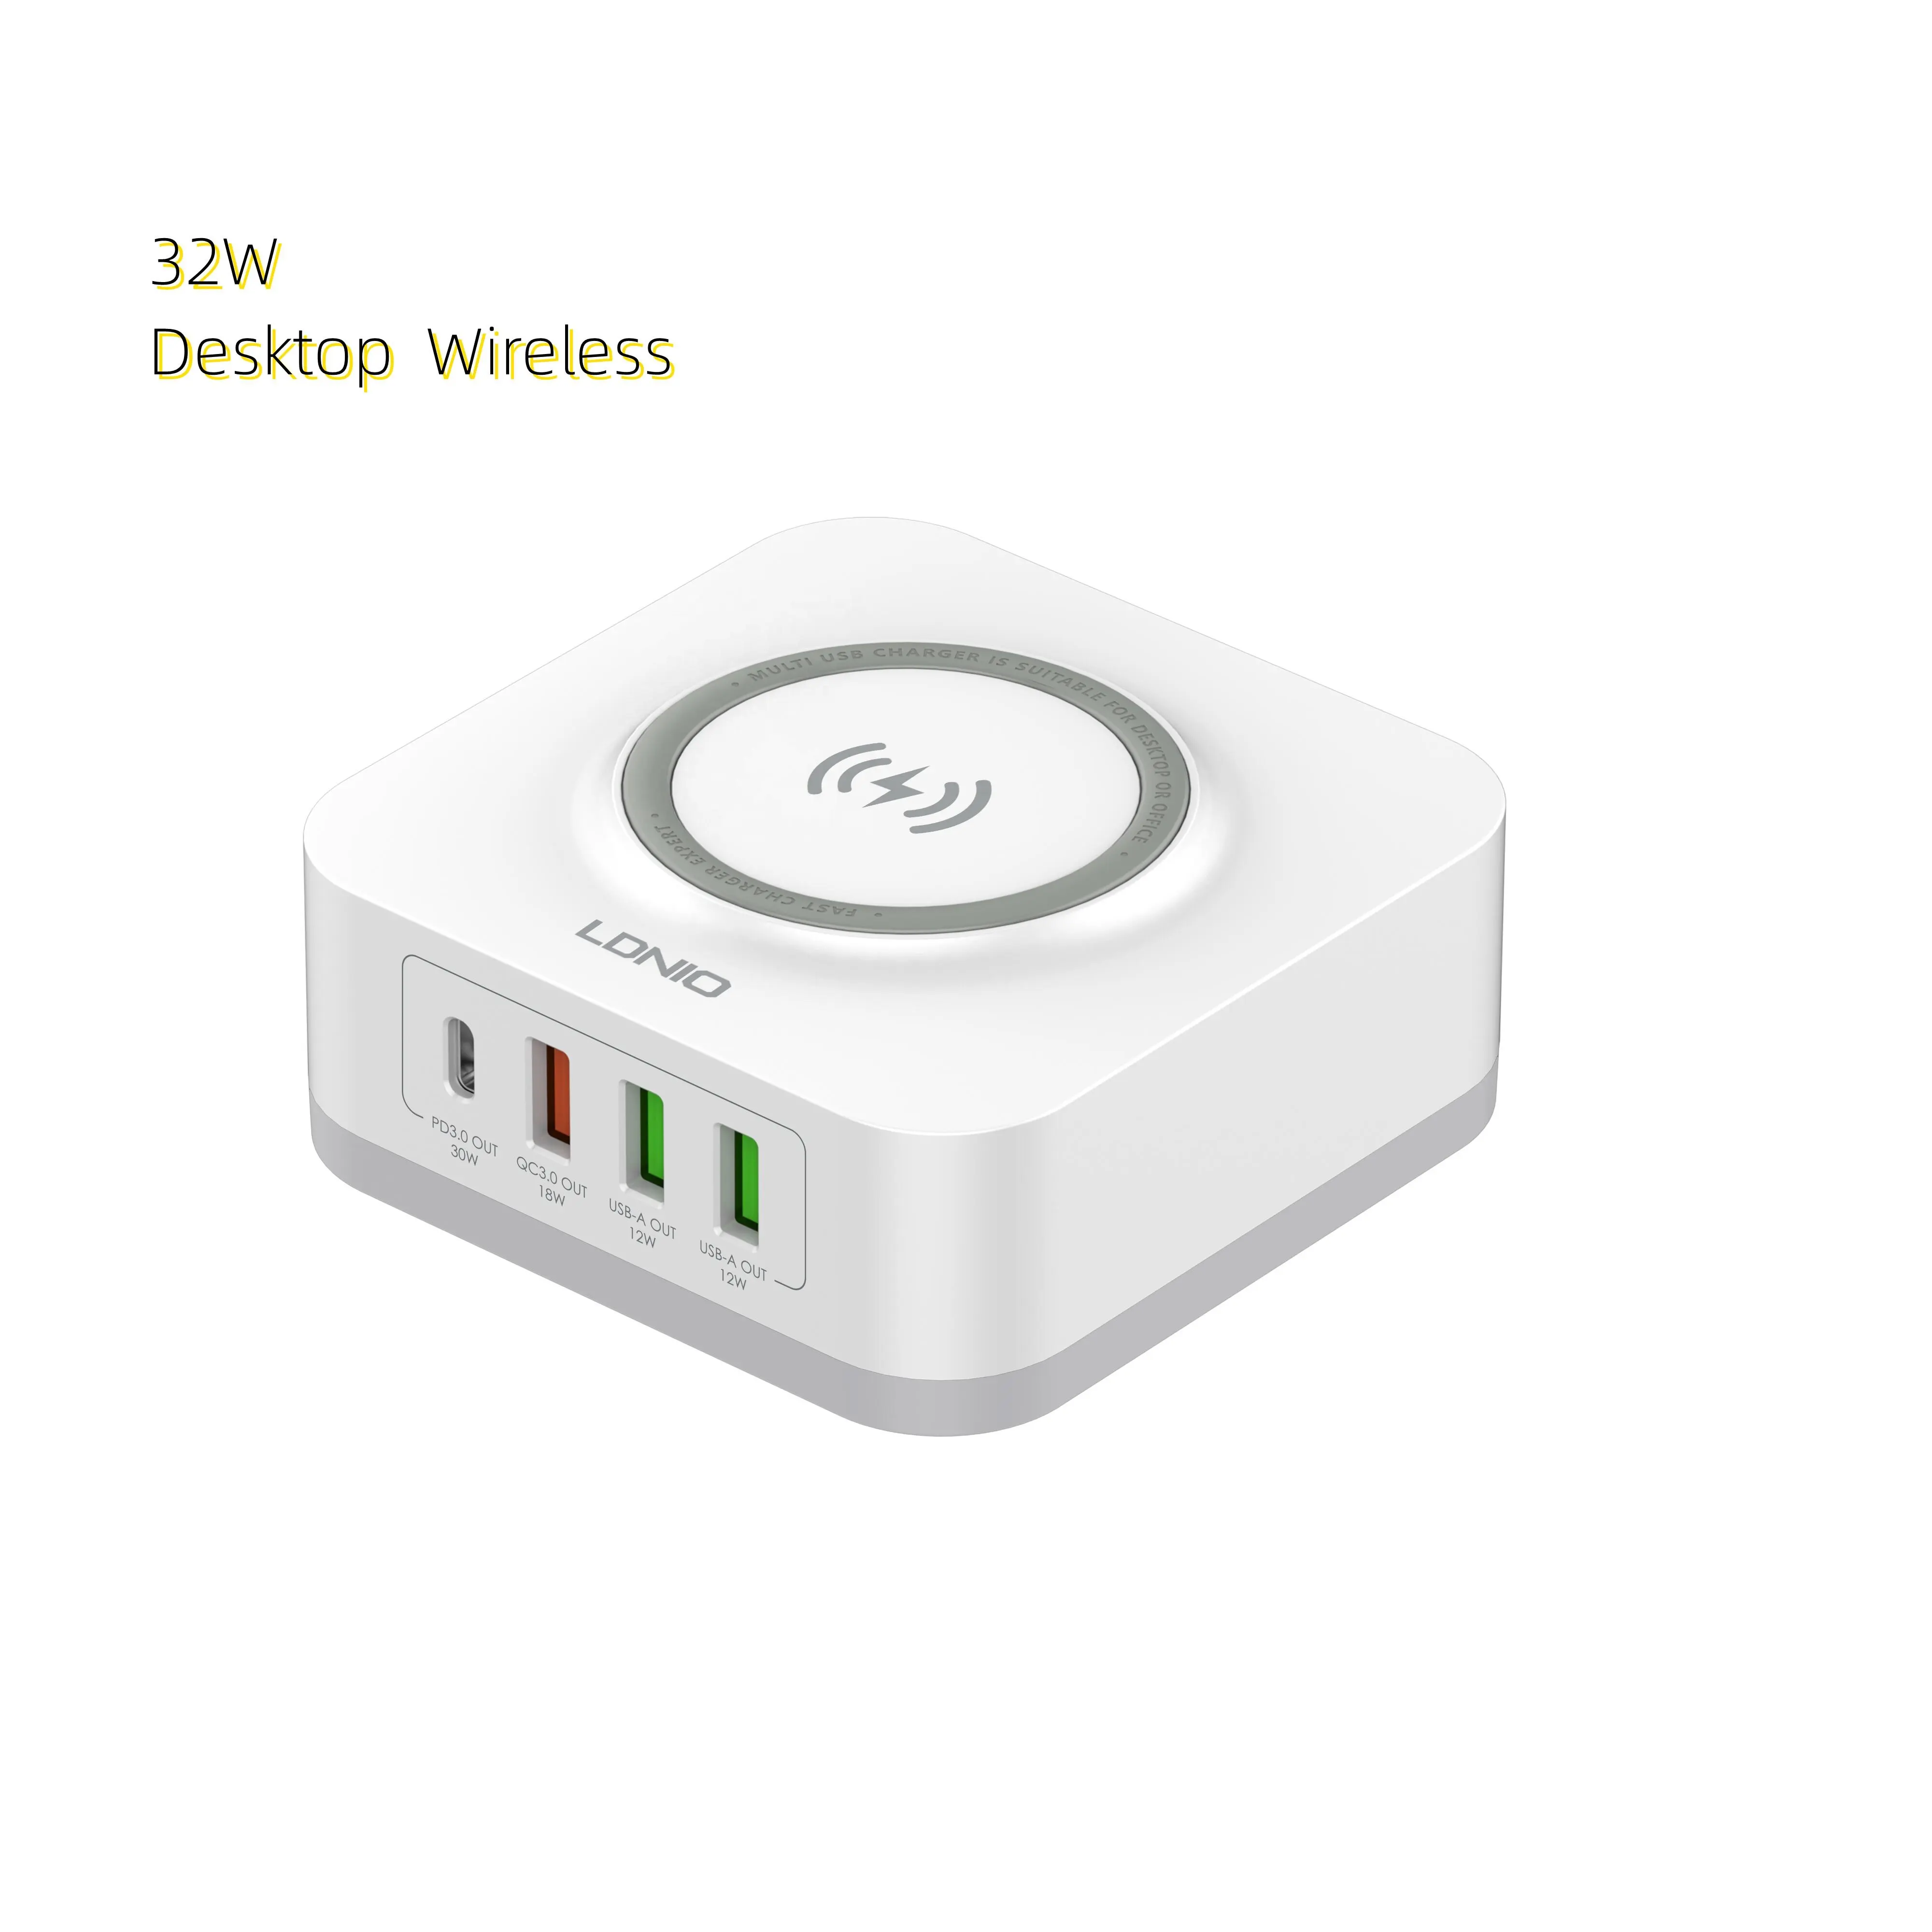 LDNIO AW004 32W For Iphone Charger with Cable Fast Wireless Charging 15 W QC 3.0 18 W&PD 20 W Mobile Phone Chargers Wholesale